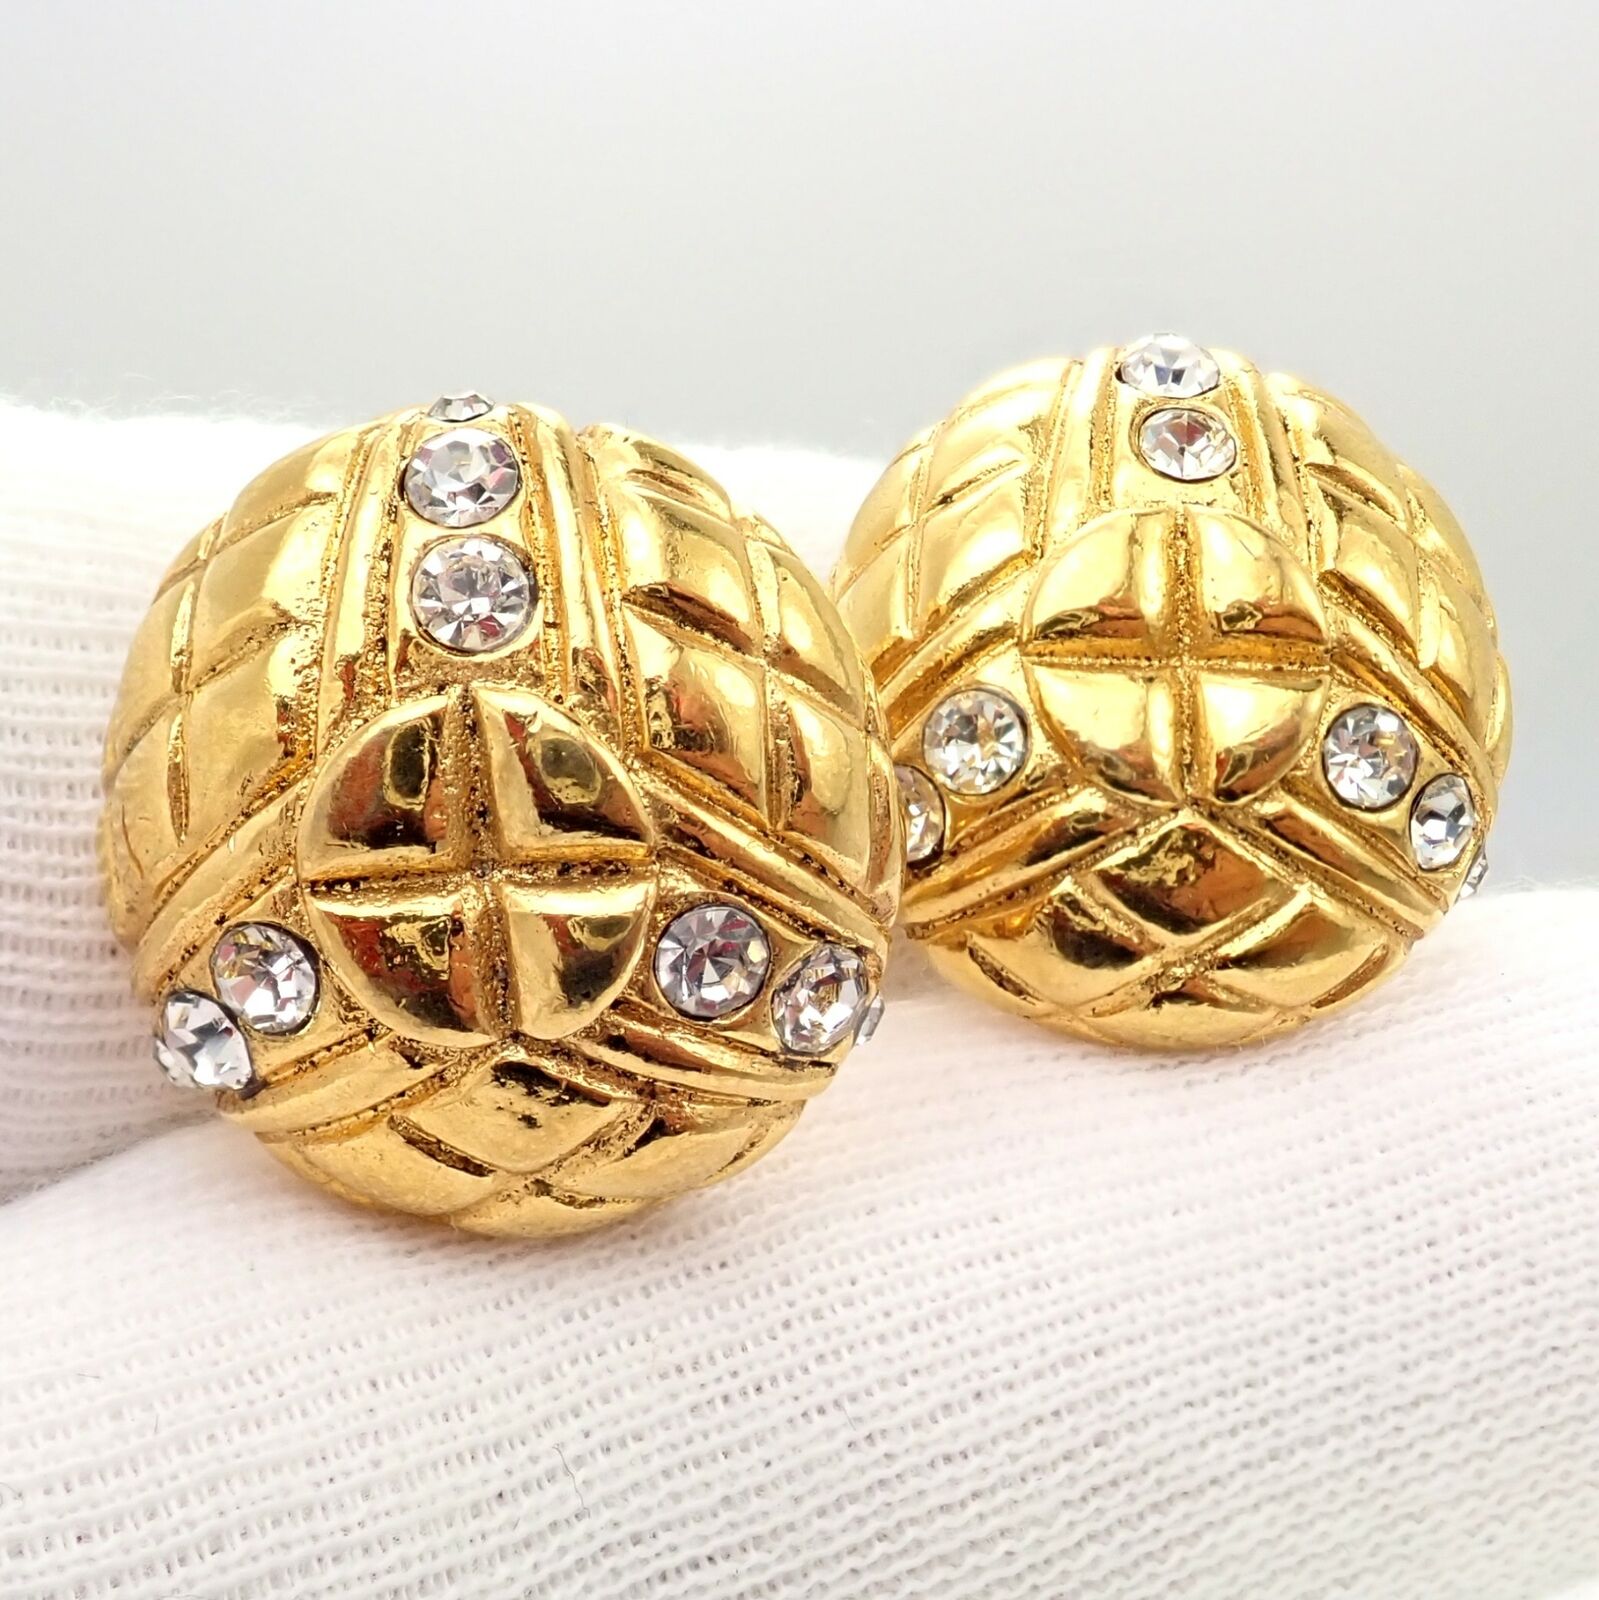 Chanel Jewelry & Watches:Vintage & Antique Jewelry:Earrings Rare! Vintage Chanel Paris France Crystal Earrings 1970's